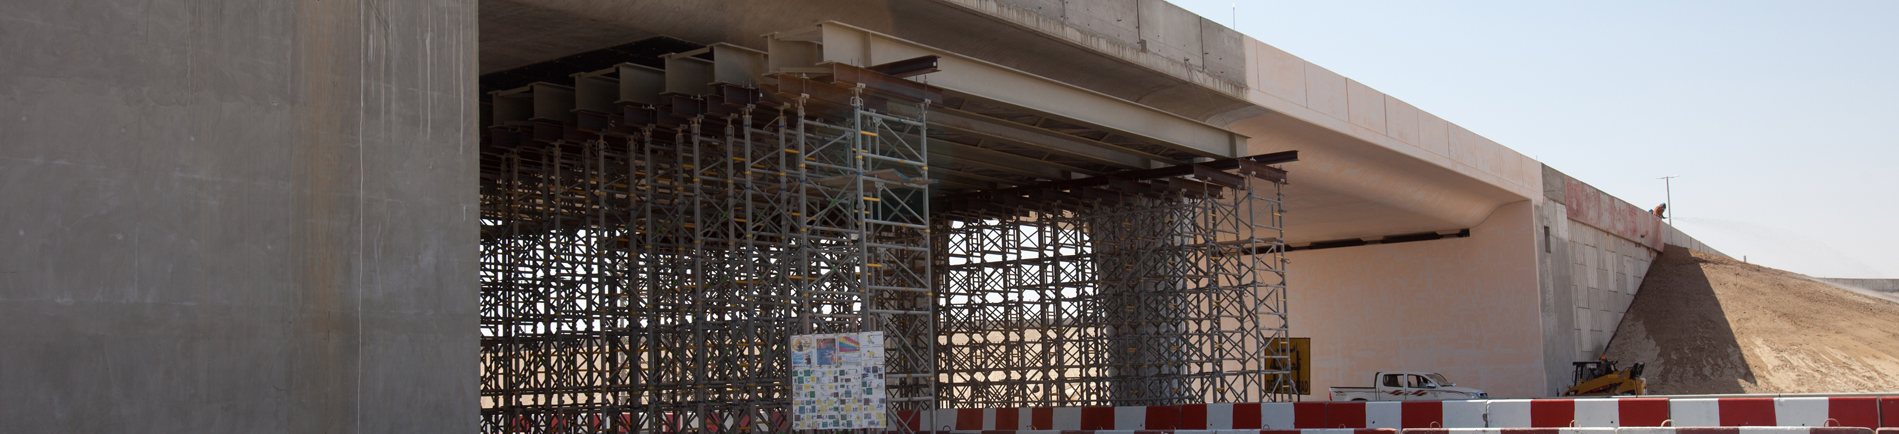 Construction of Bridge and Underpass at Nahil (E20 Road)